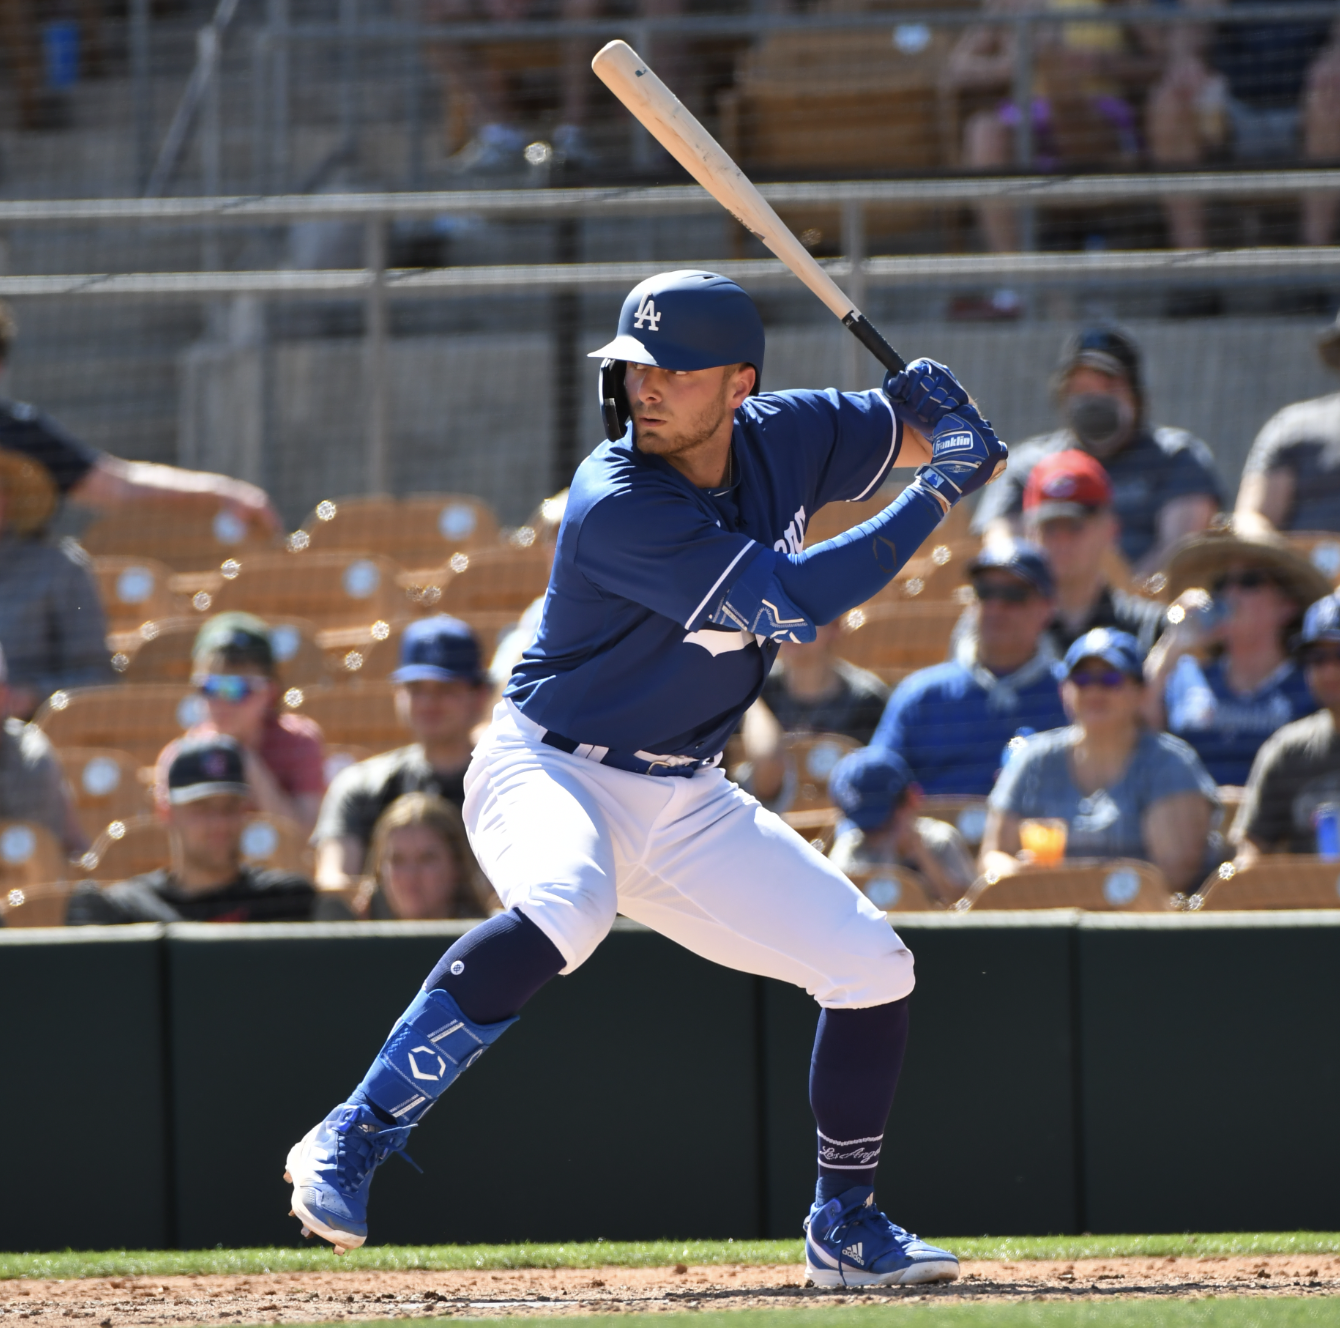 GLENDALE, AZ - MARCH 22, 2022: Michael Busch #84 of the Los Angeles Dodgers bats during the fifth inning of an MLB spring training game against the Cincinnati Reds at Camelback Ranch on March 22, 2022 in Glendale, Arizona.